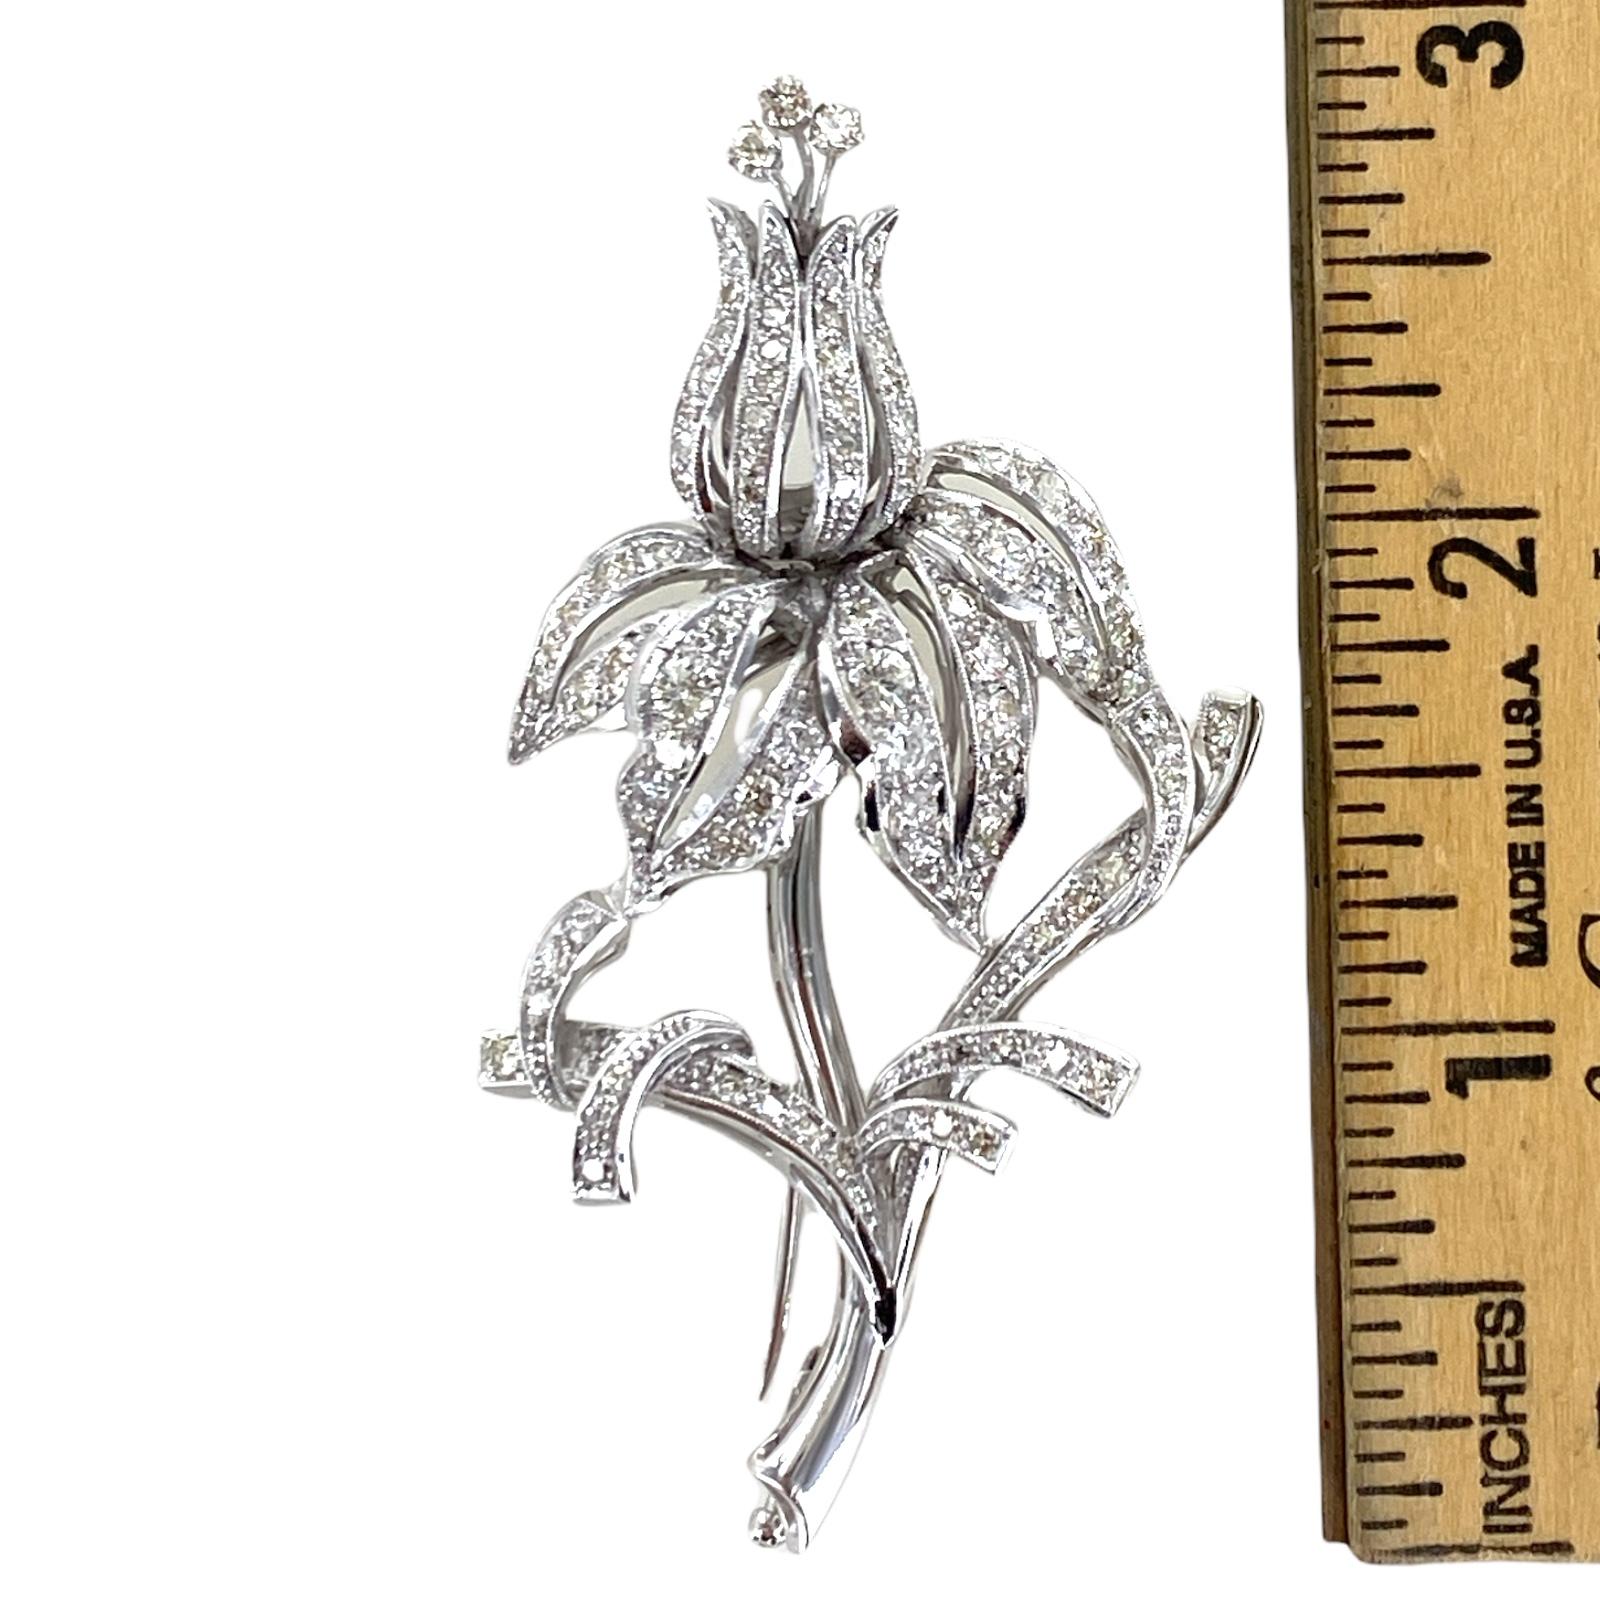 Handcrafted around 1940's, this diamond tulip pin is fashioned in 14 karat white gold. The brooch features round brilliant and single cut diamonds weighing approximately 3.00 carat total weight and graded I-J color and SI clarity. The pin measures